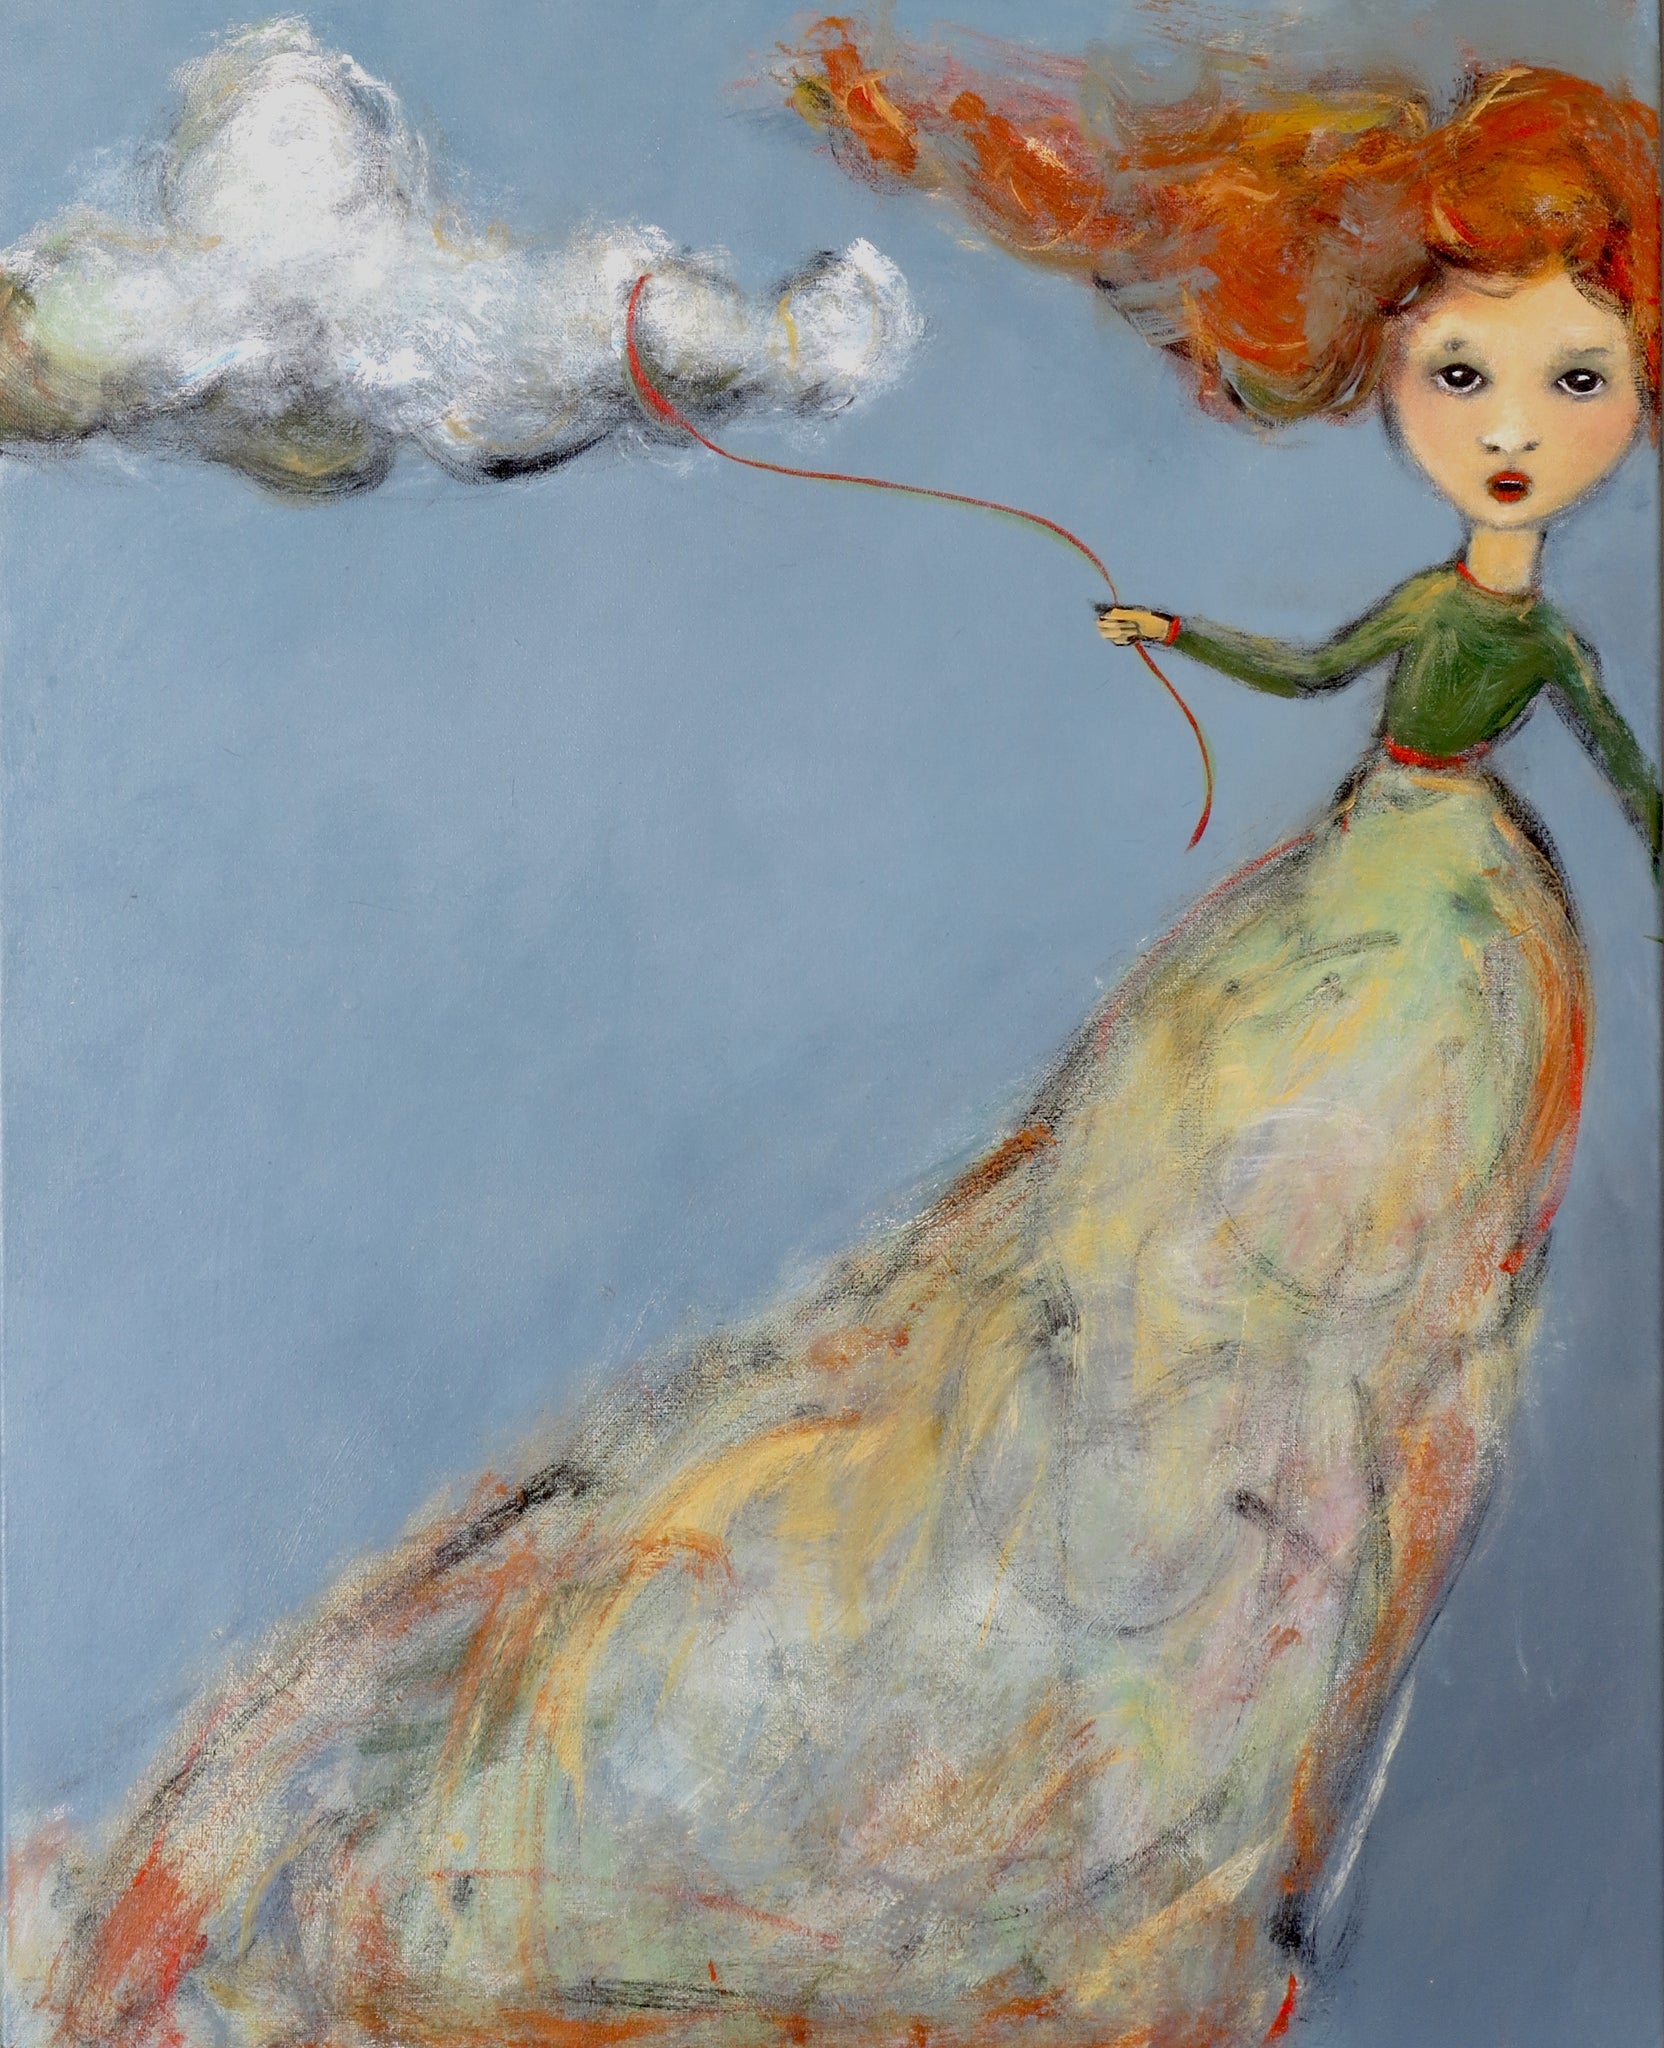 SOLD   "Holding On by a Thread, Tied to a Cloud" Original Painting by Jacquline Hurlbert